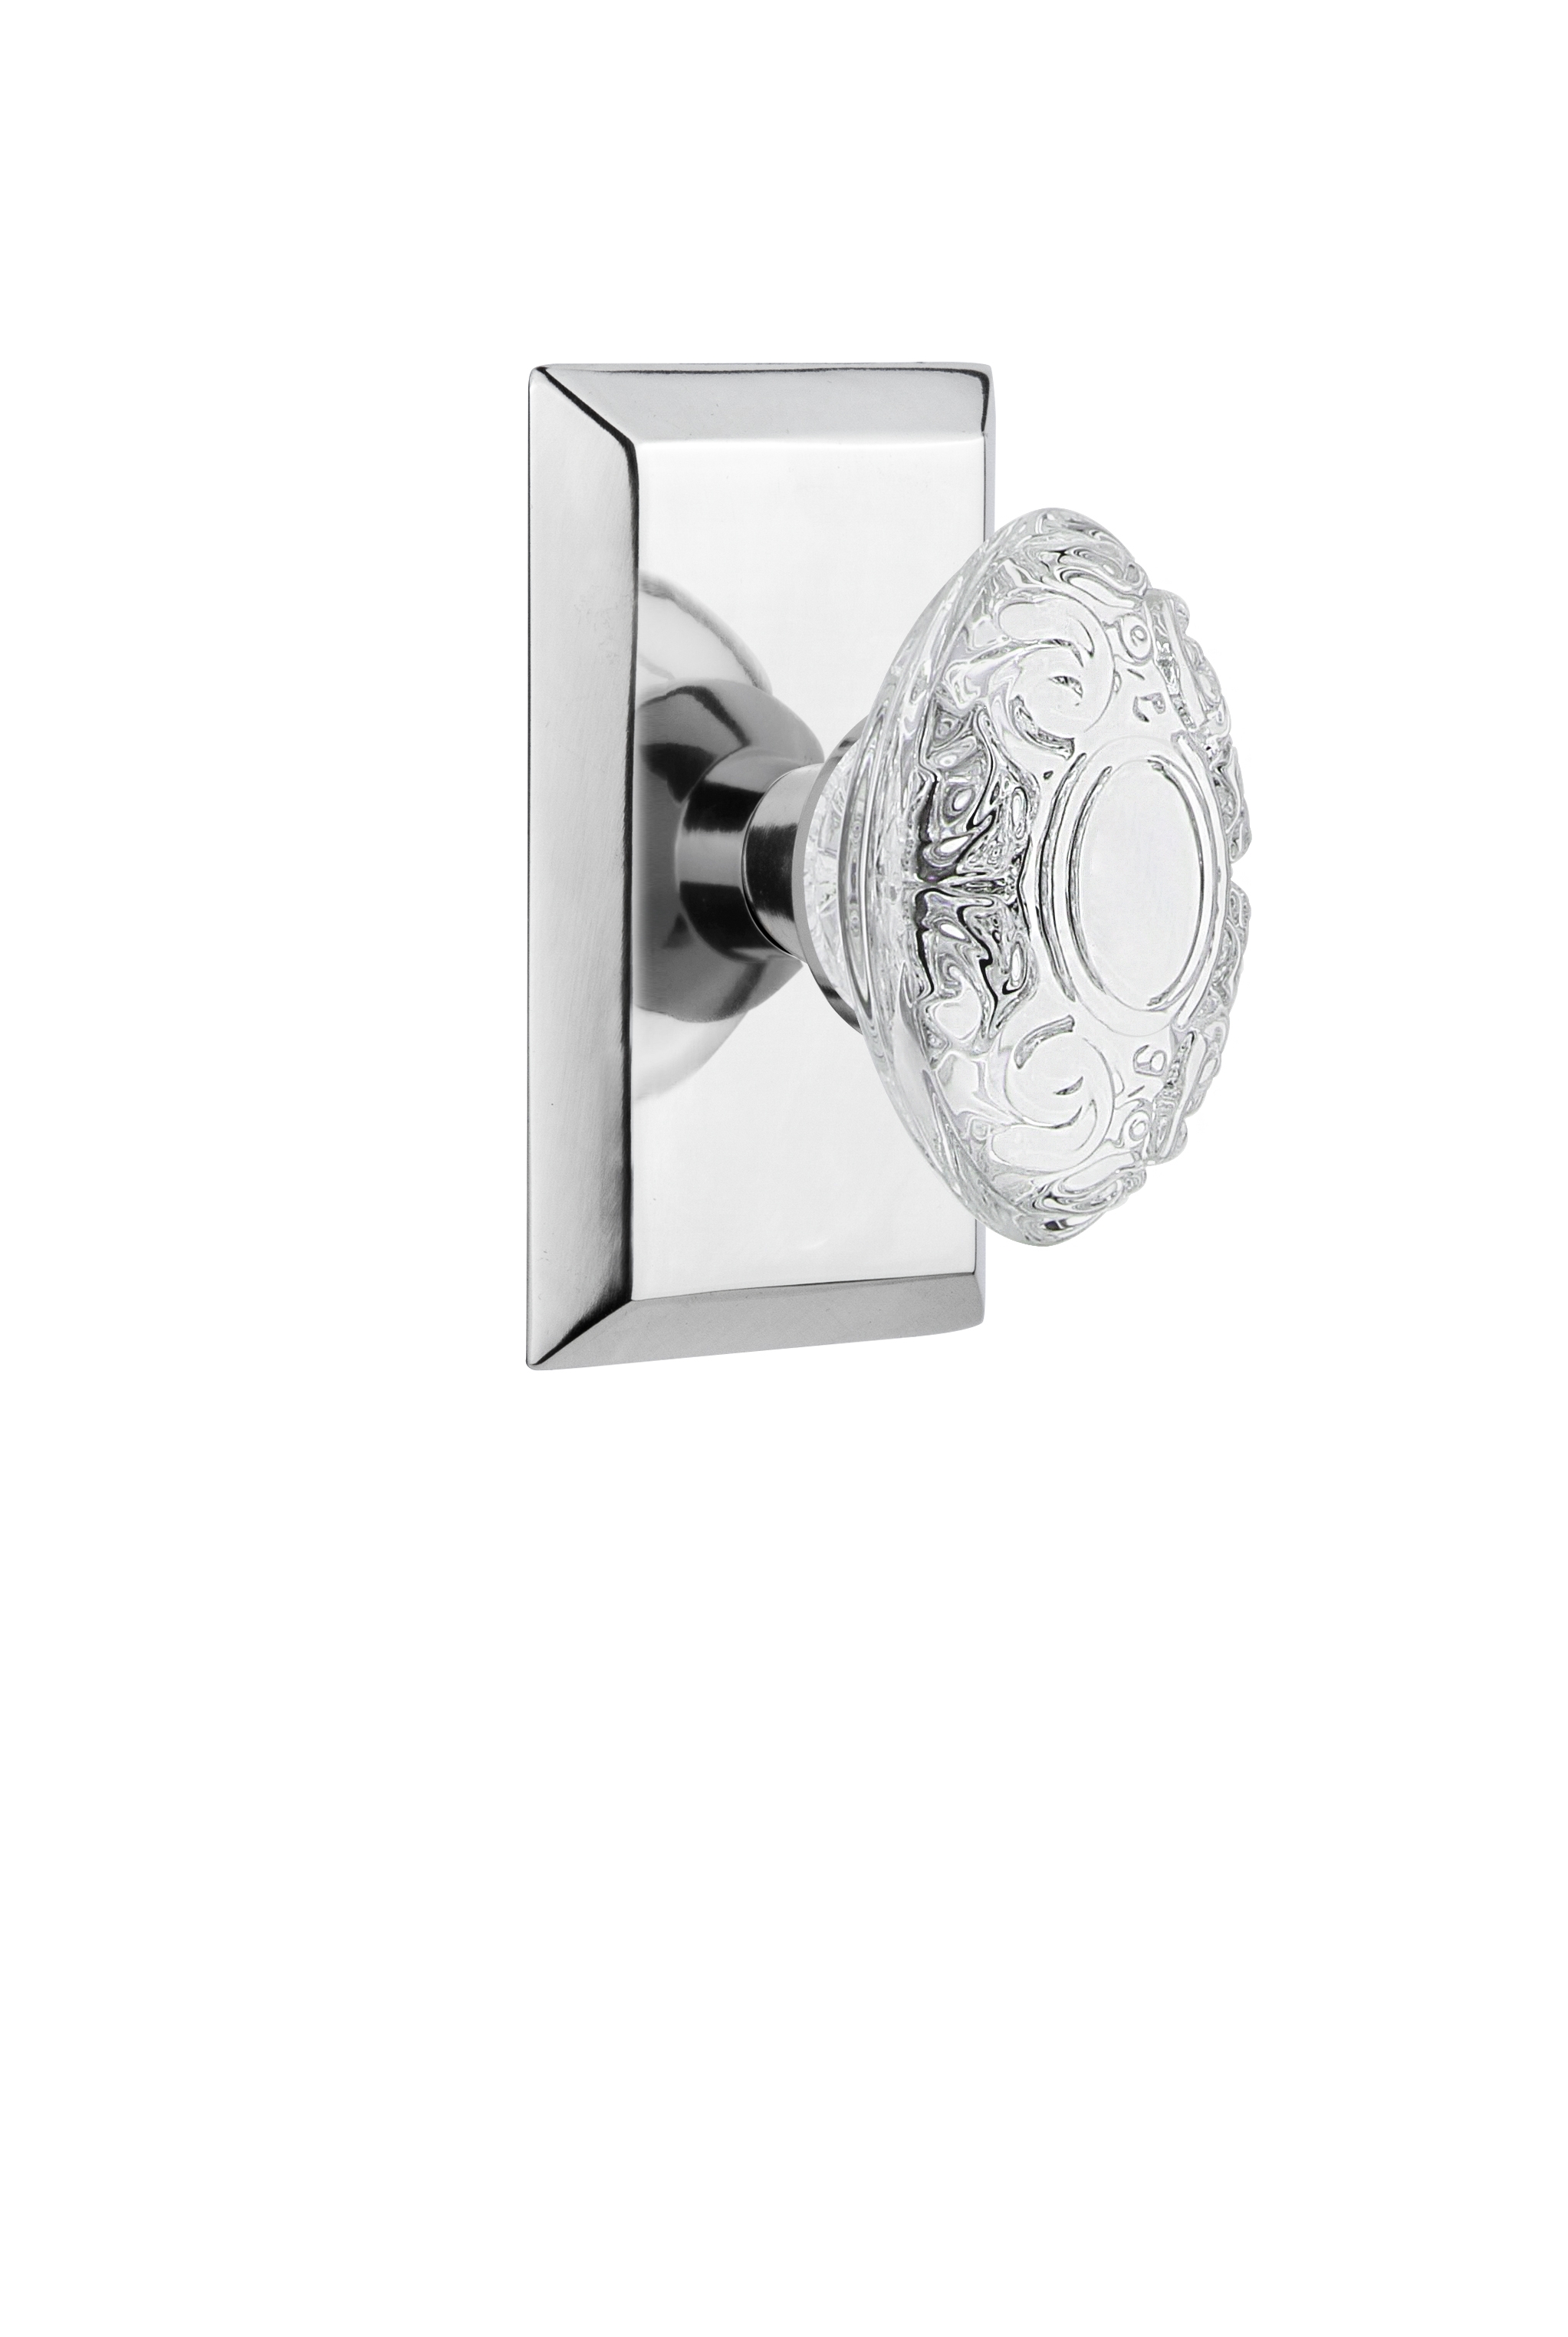 Nostalgic Warehouse 754106 Studio Plate with Crystal Victorian Privacy Door Knob 2.75 Antique Brass